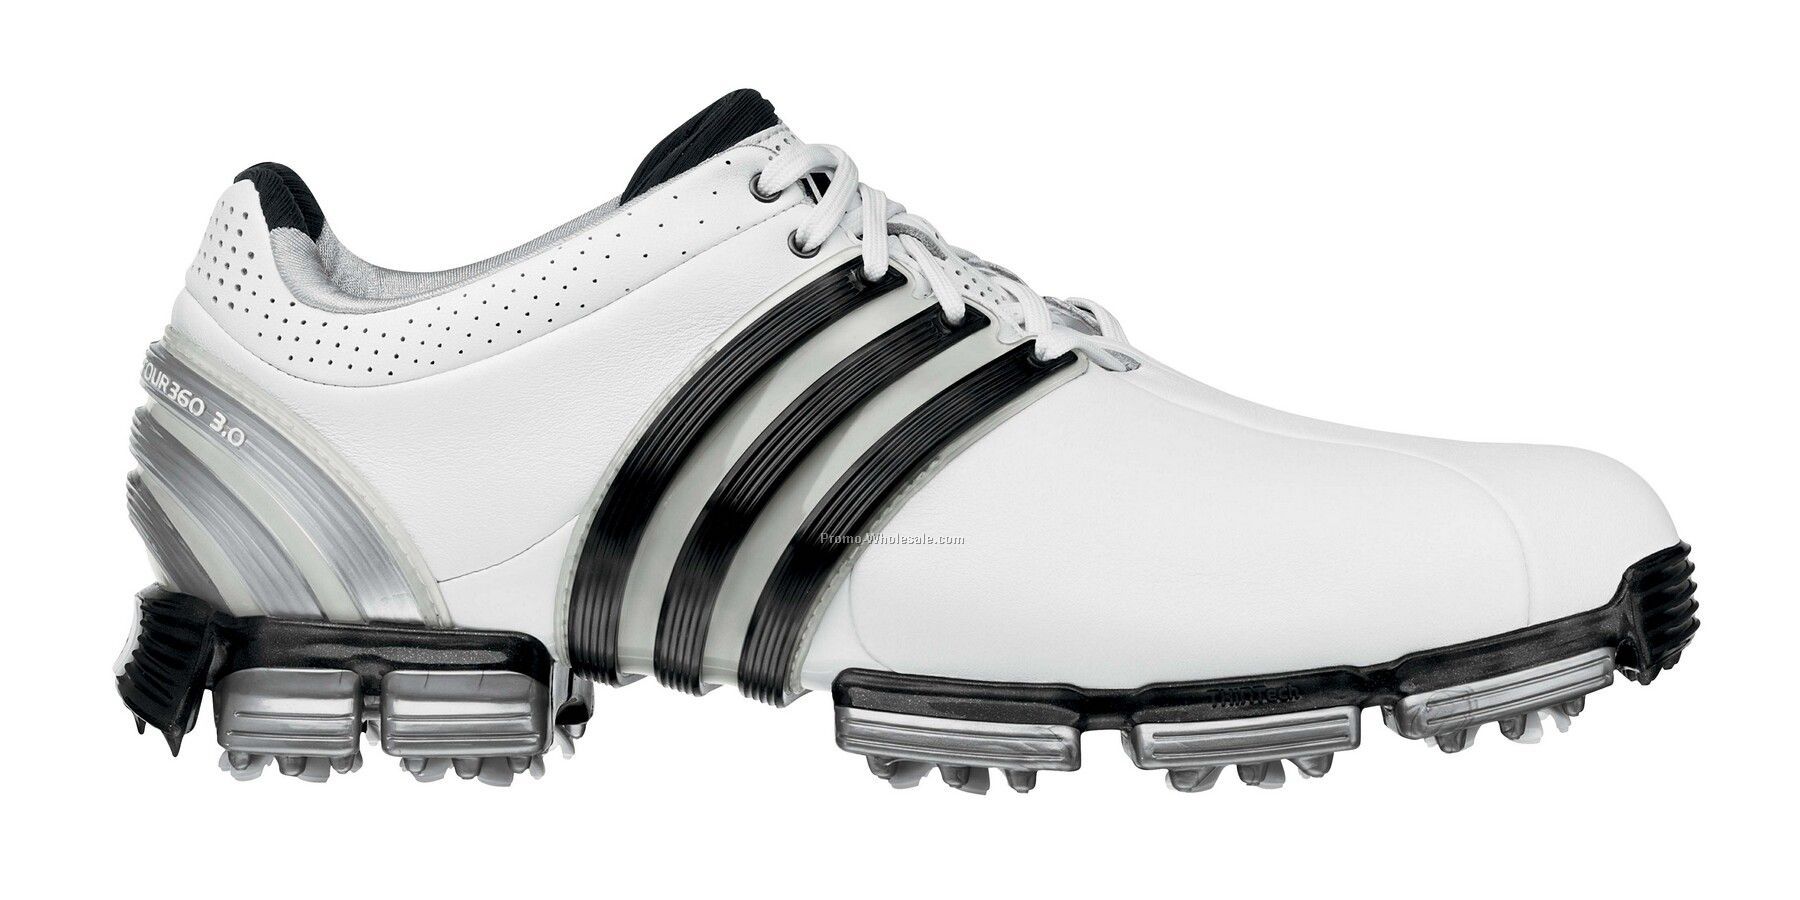 Are adidas tour 360 golf shoes made in China?